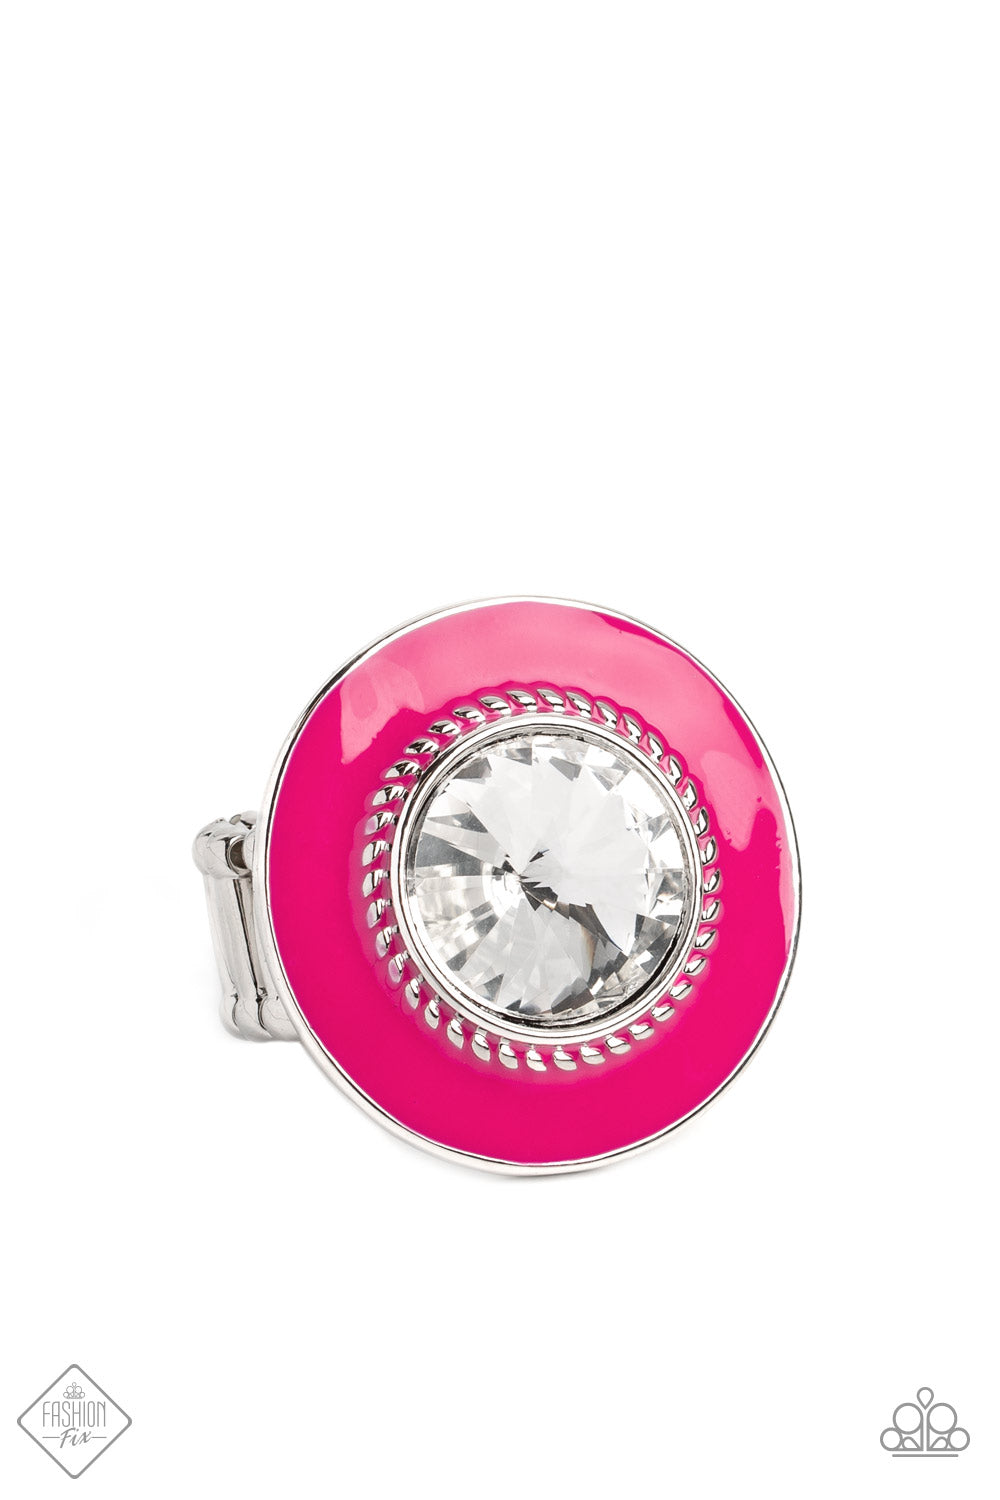 Ladylike Levity - Pink and Silver Ring - Paparazzi Accessories - Featuring a vibrant Pink Peacock backdrop with silver-studded details, a dramatically oversized white reflective gem stands out atop the finger for a colorful, statement-making finish. Features a stretchy band for a flexible fit. Sold as one individual ring.